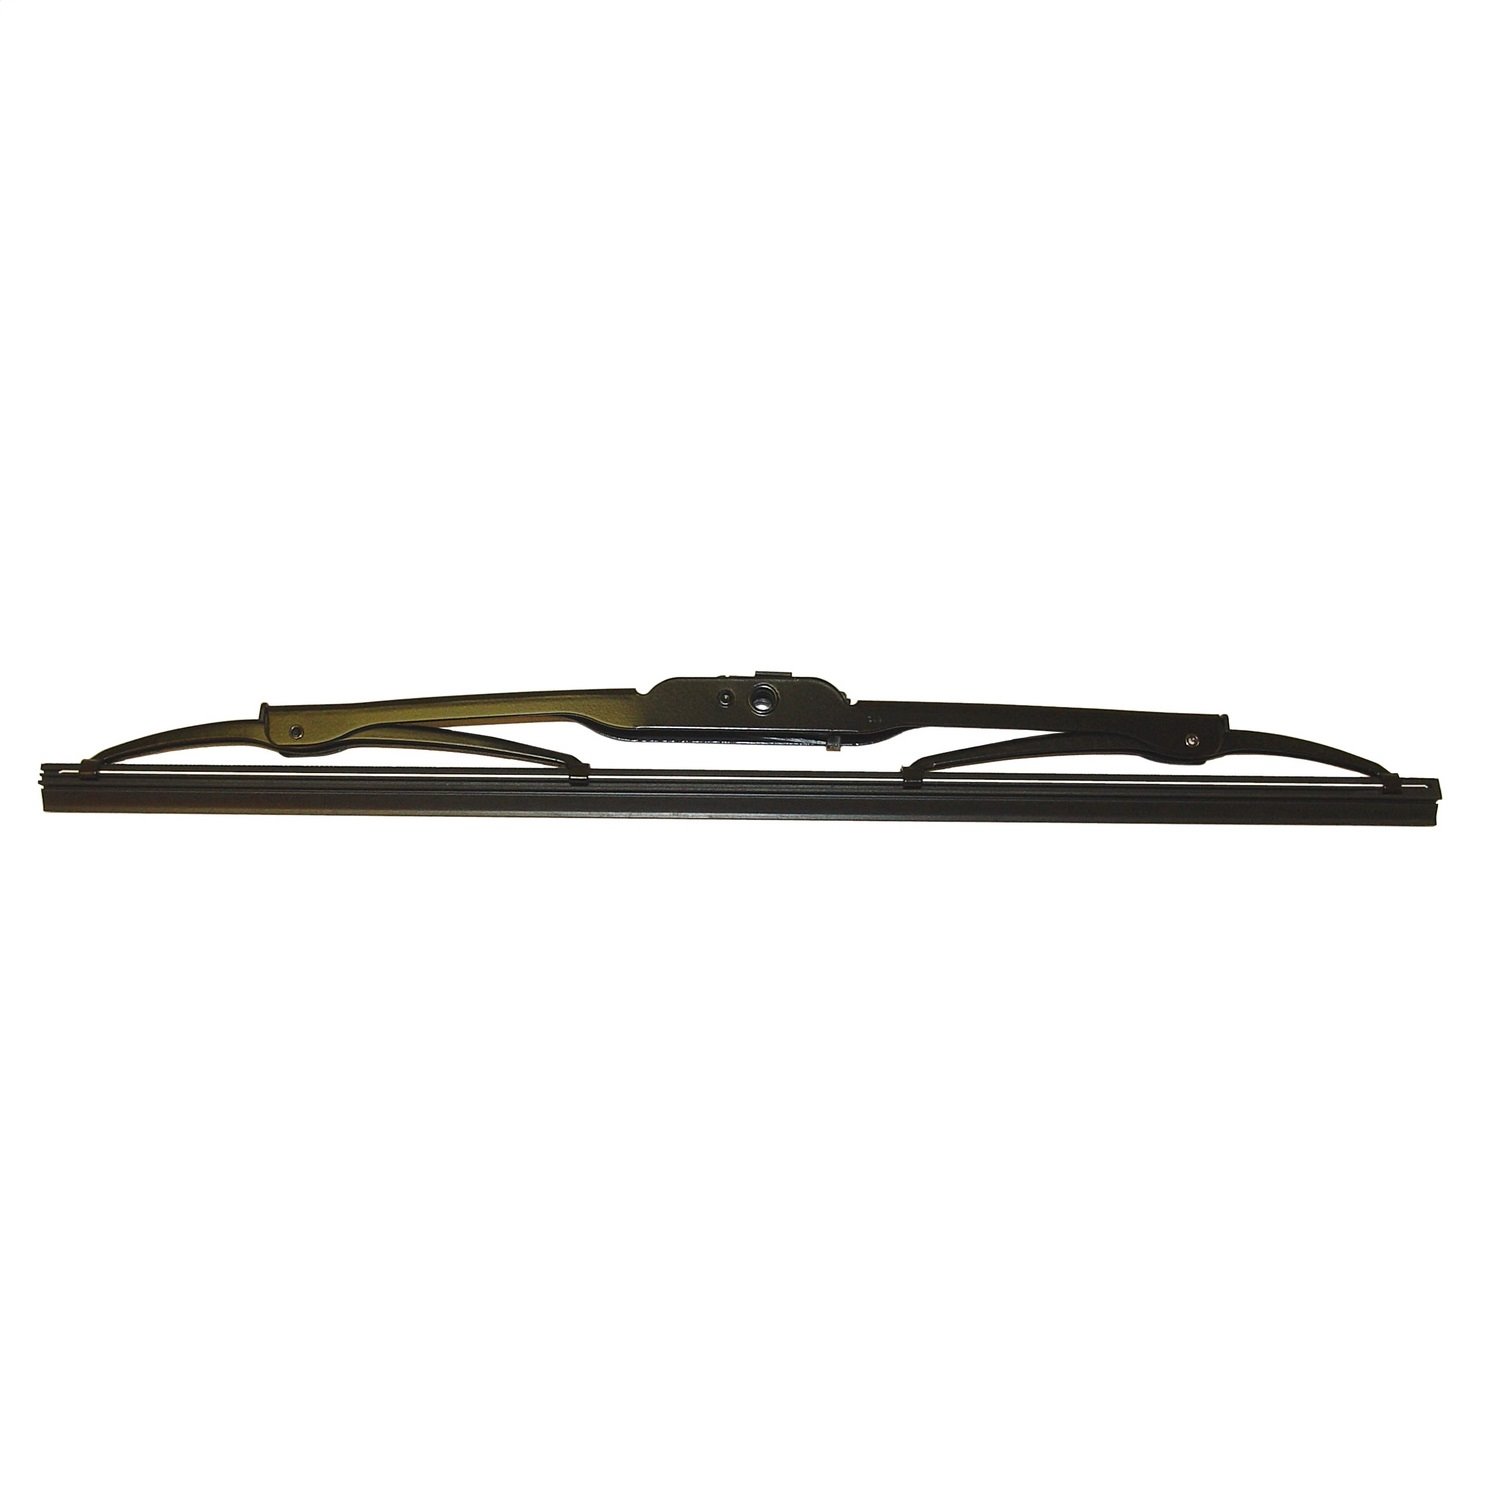 This 13 inch windshield wiper blade from Omix-ADA fits 87-06 Jeep Wrangler.